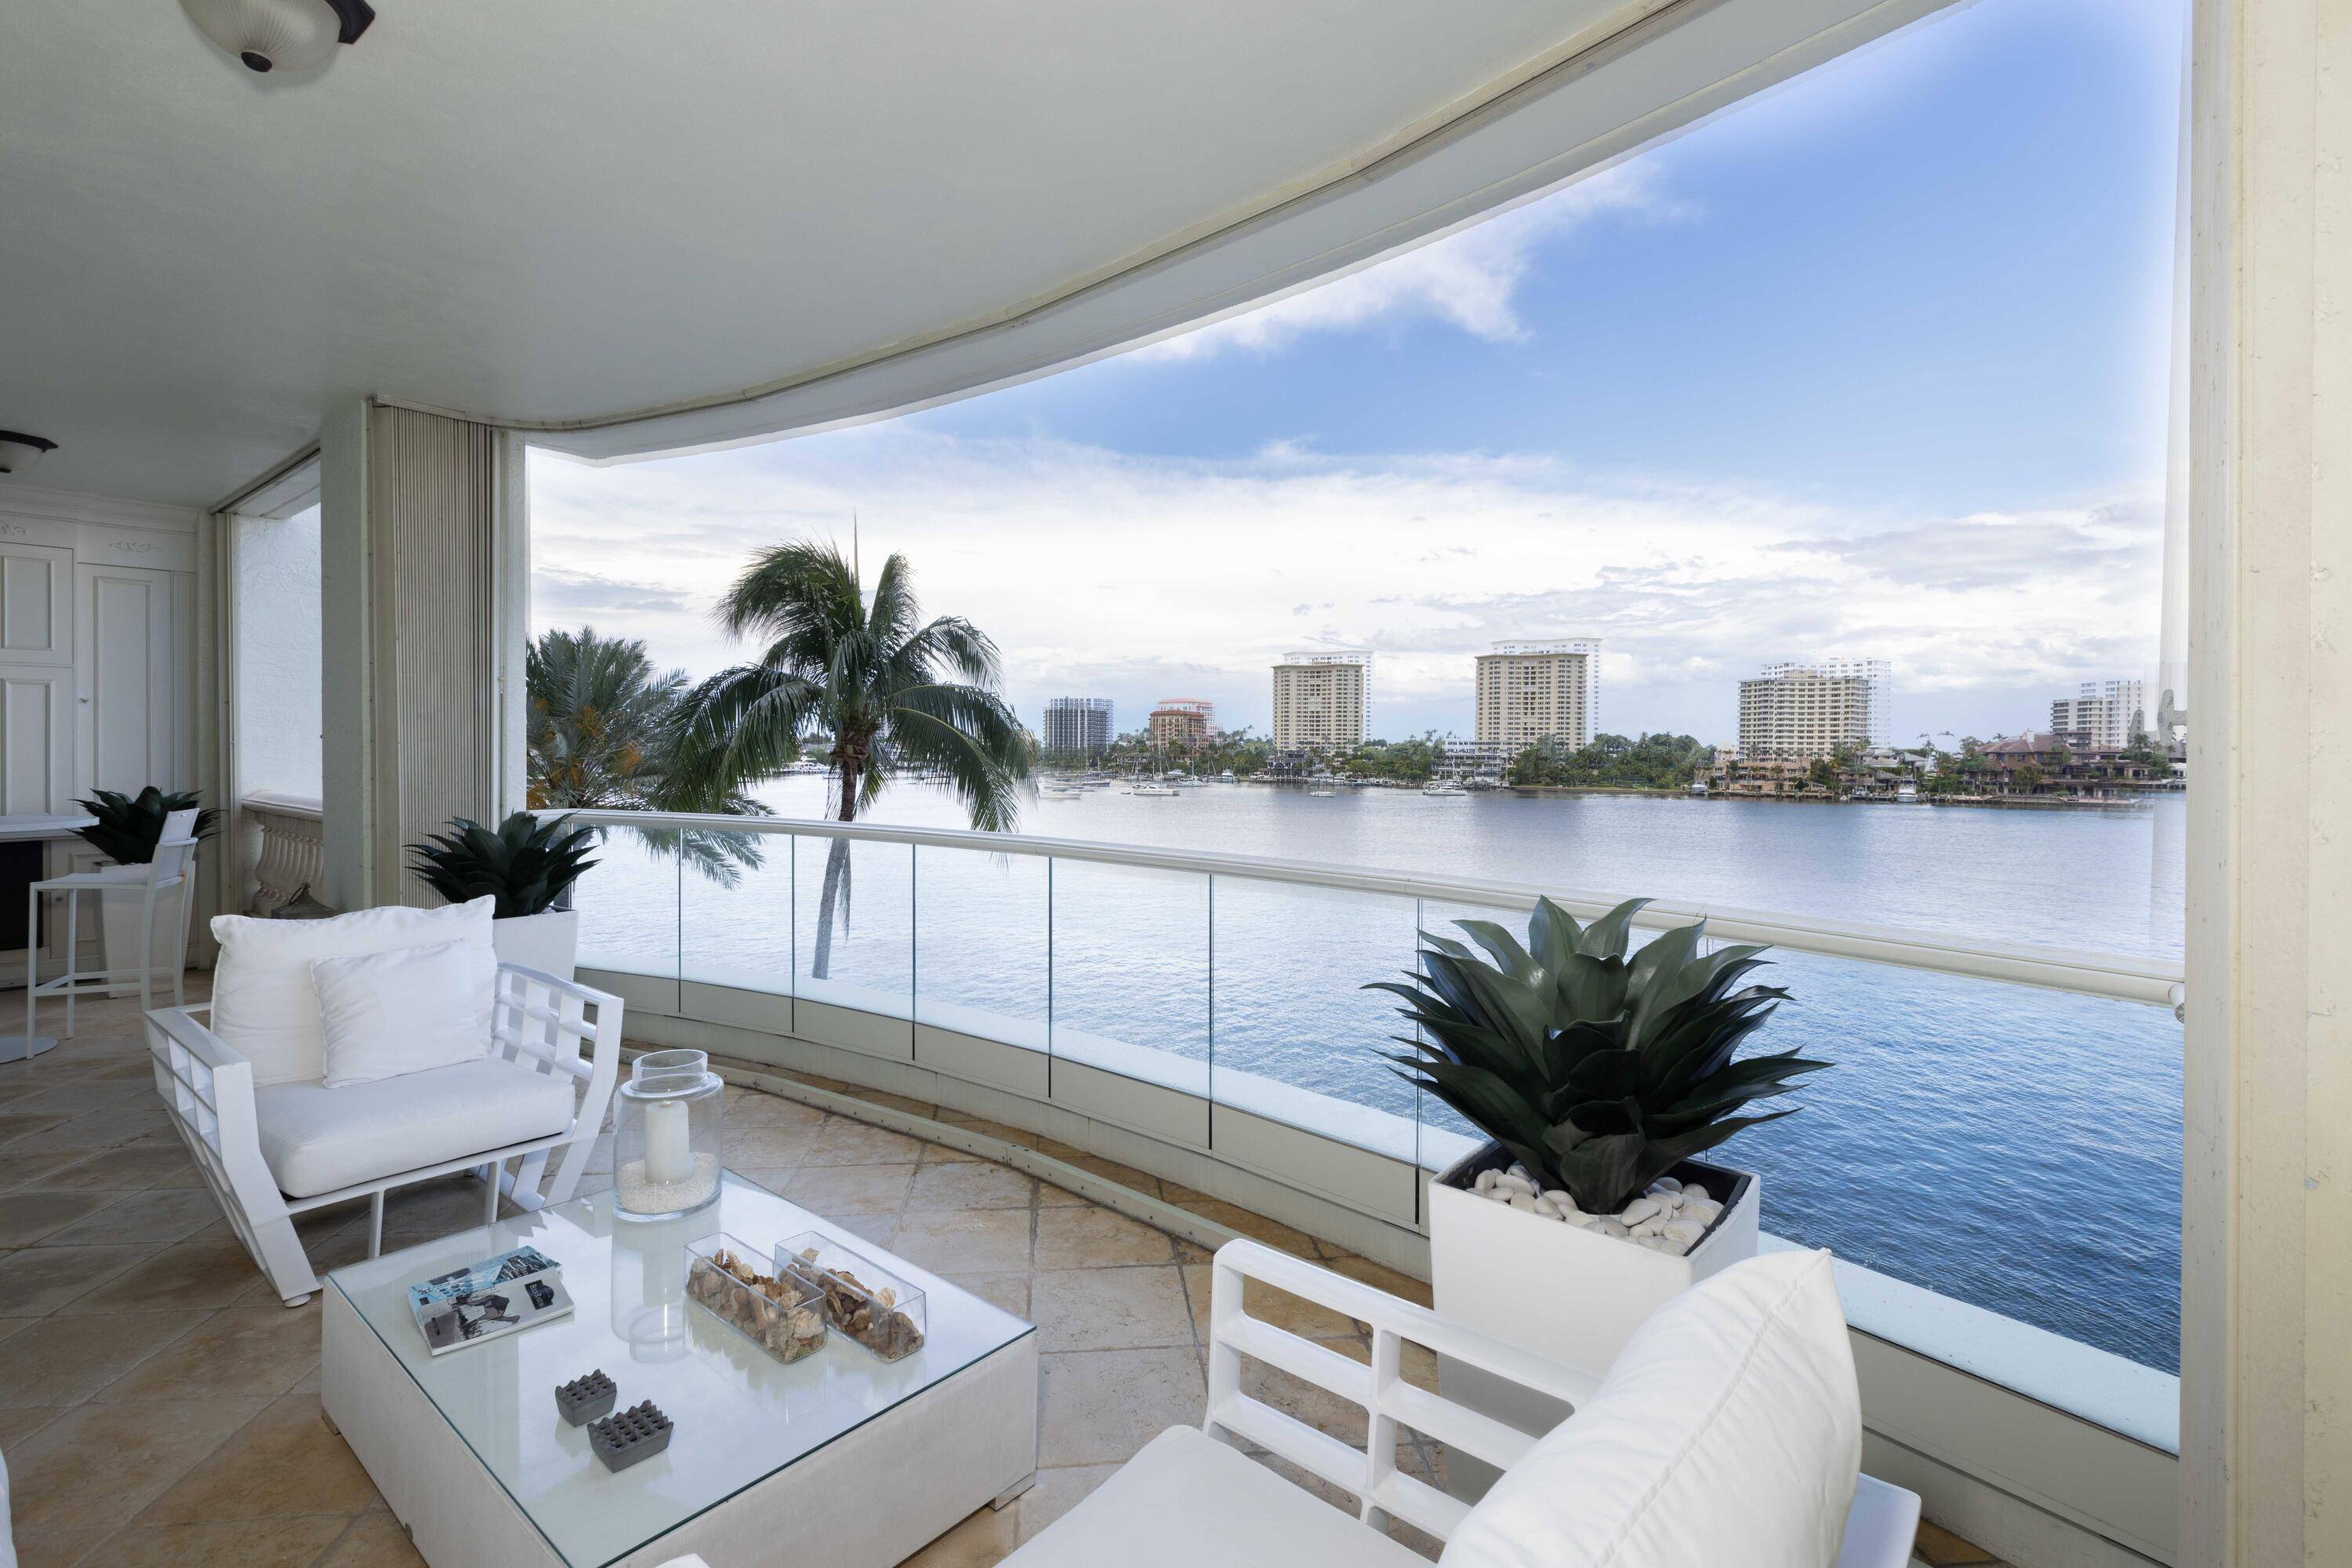 Step into a world of comfort and elegance with this stunning apartment in beautiful Boca Raton, Florida.